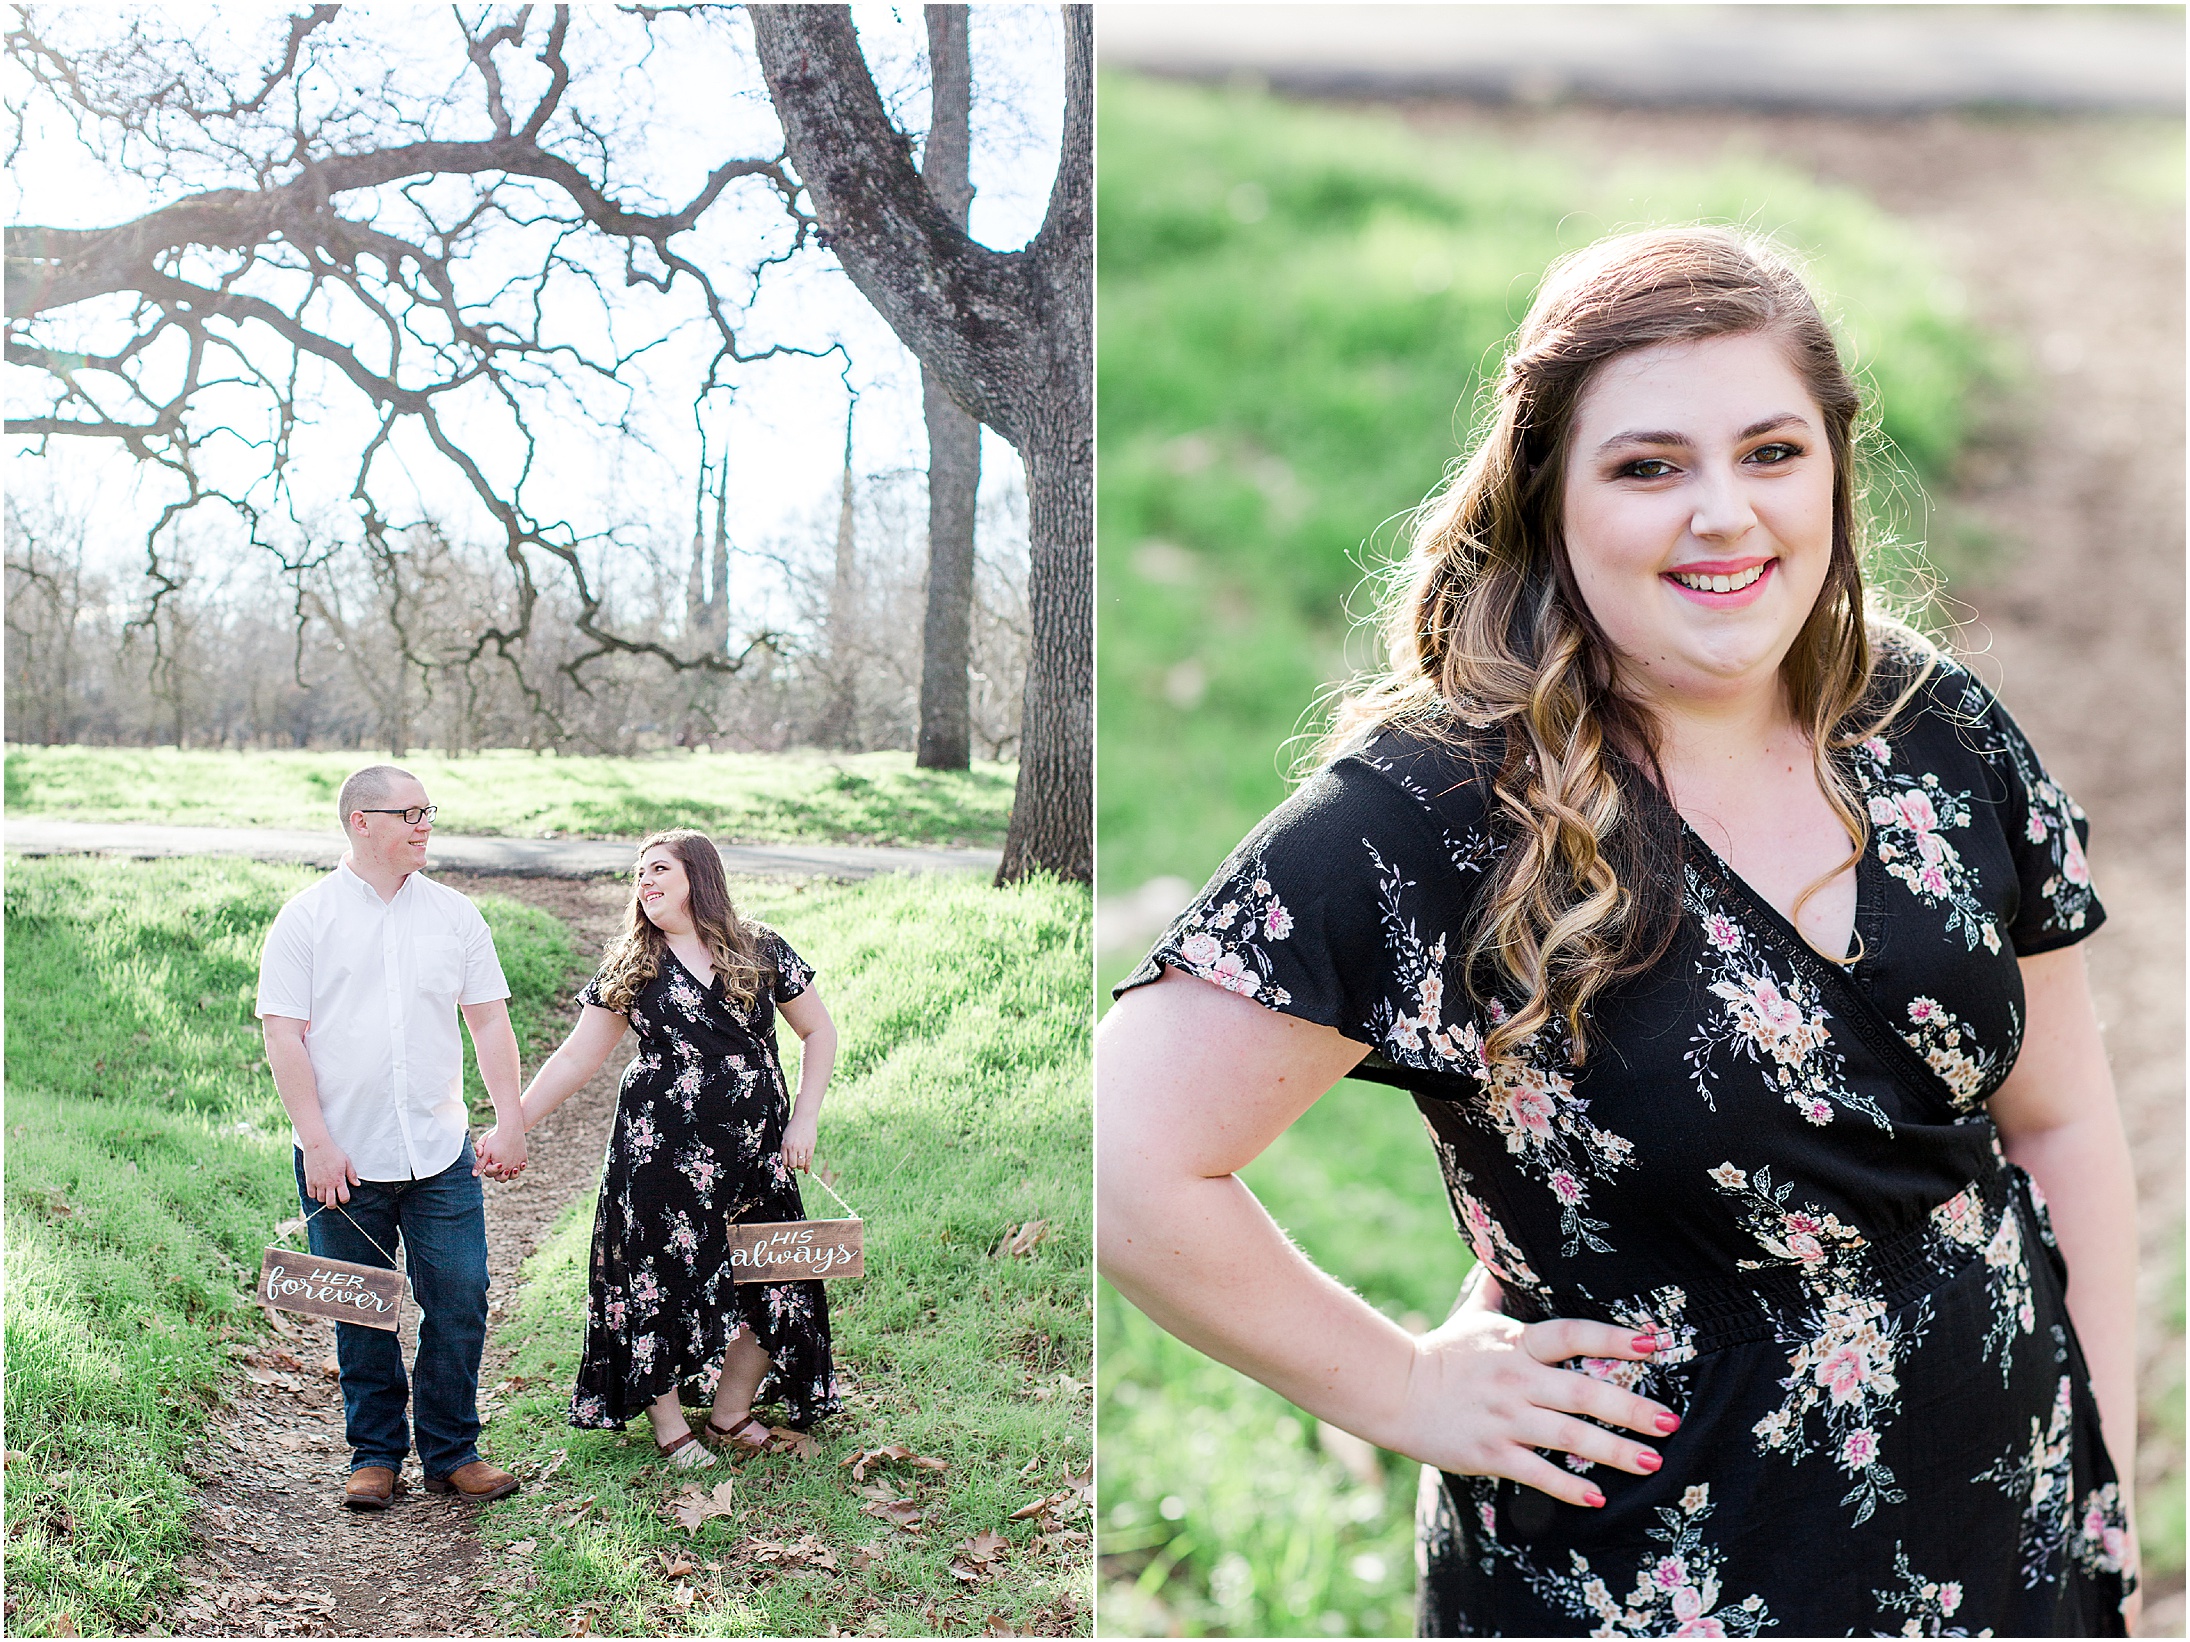 Bidwell Park Chico California Engagement First Date Said Yes Wedding Signs,